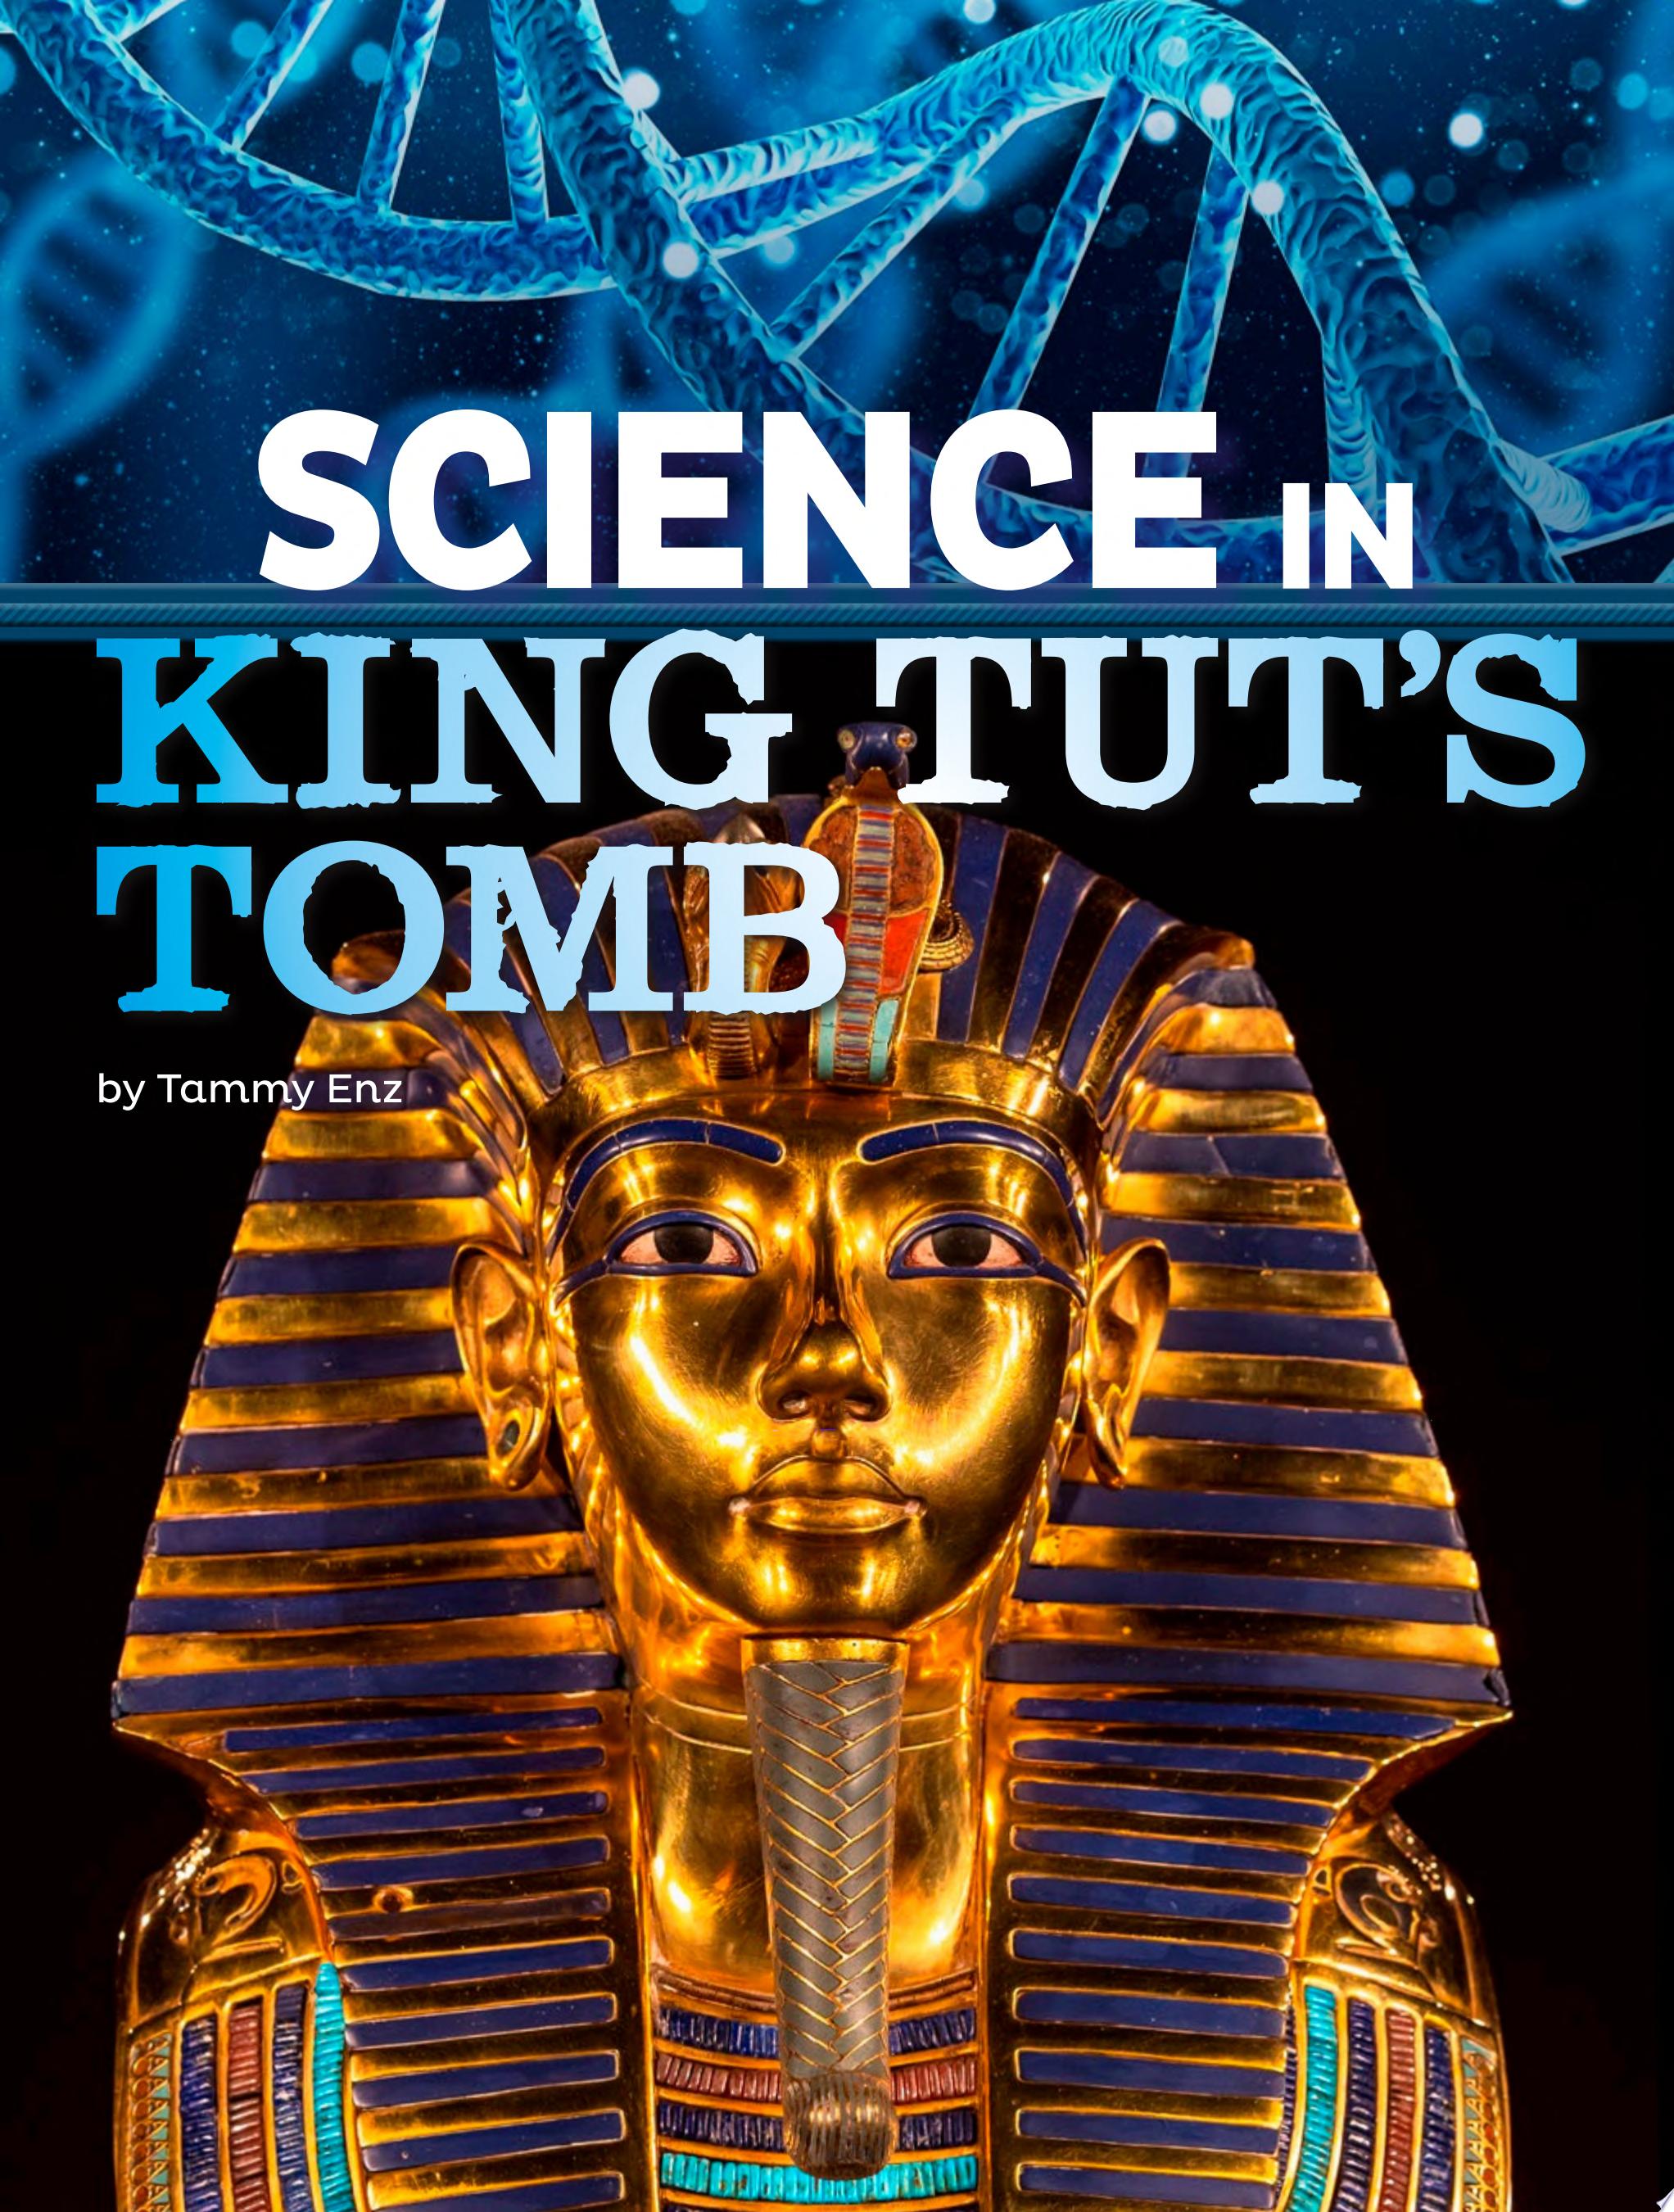 Image for "Science in King Tut's Tomb"